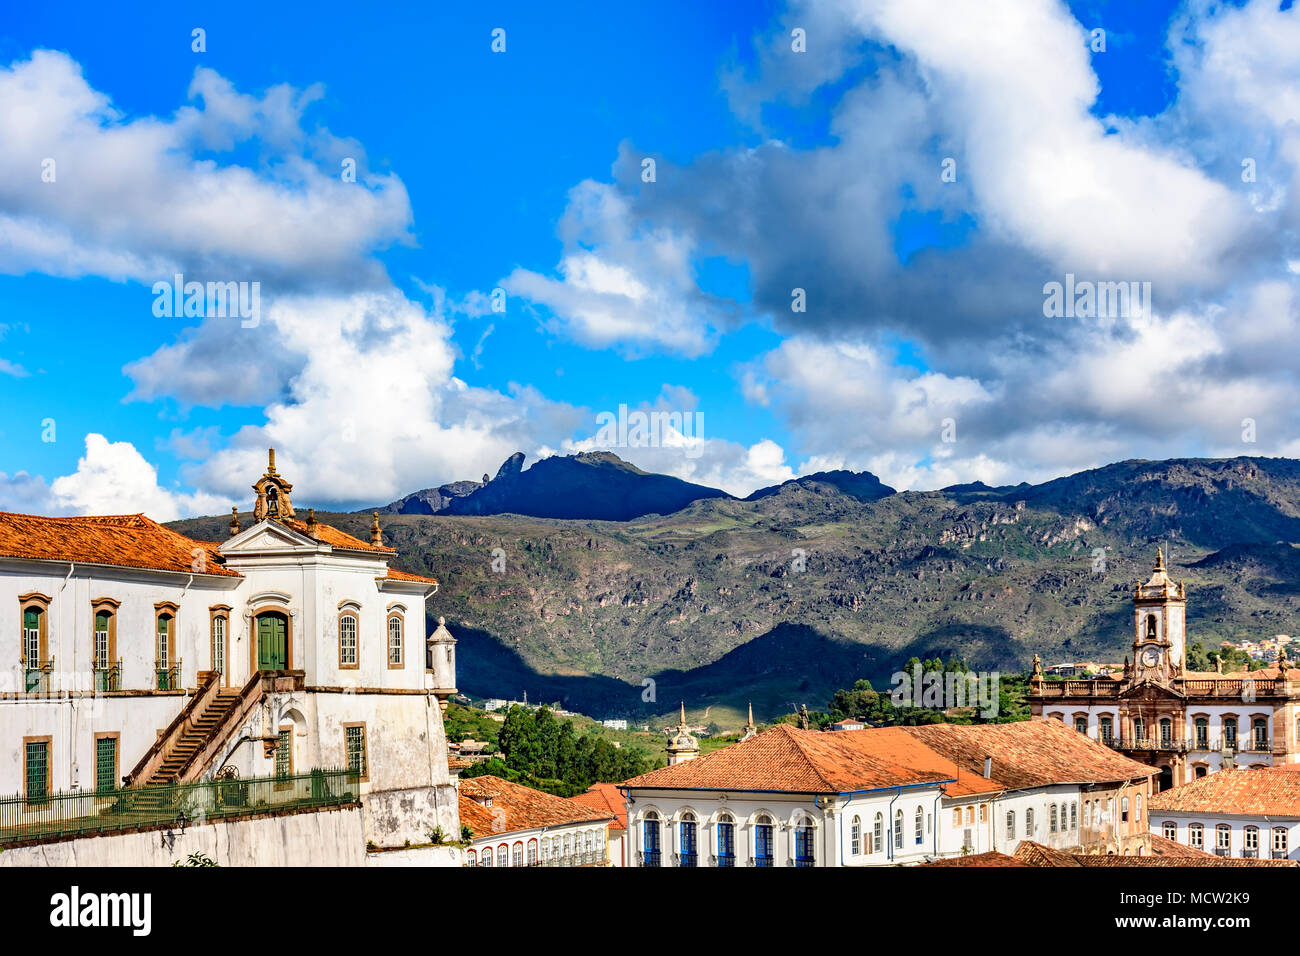 Top view of the center of the historic Ouro Preto city in Minas Gerais, Brazil with its famous churches and old buildings with hills in background Stock Photo